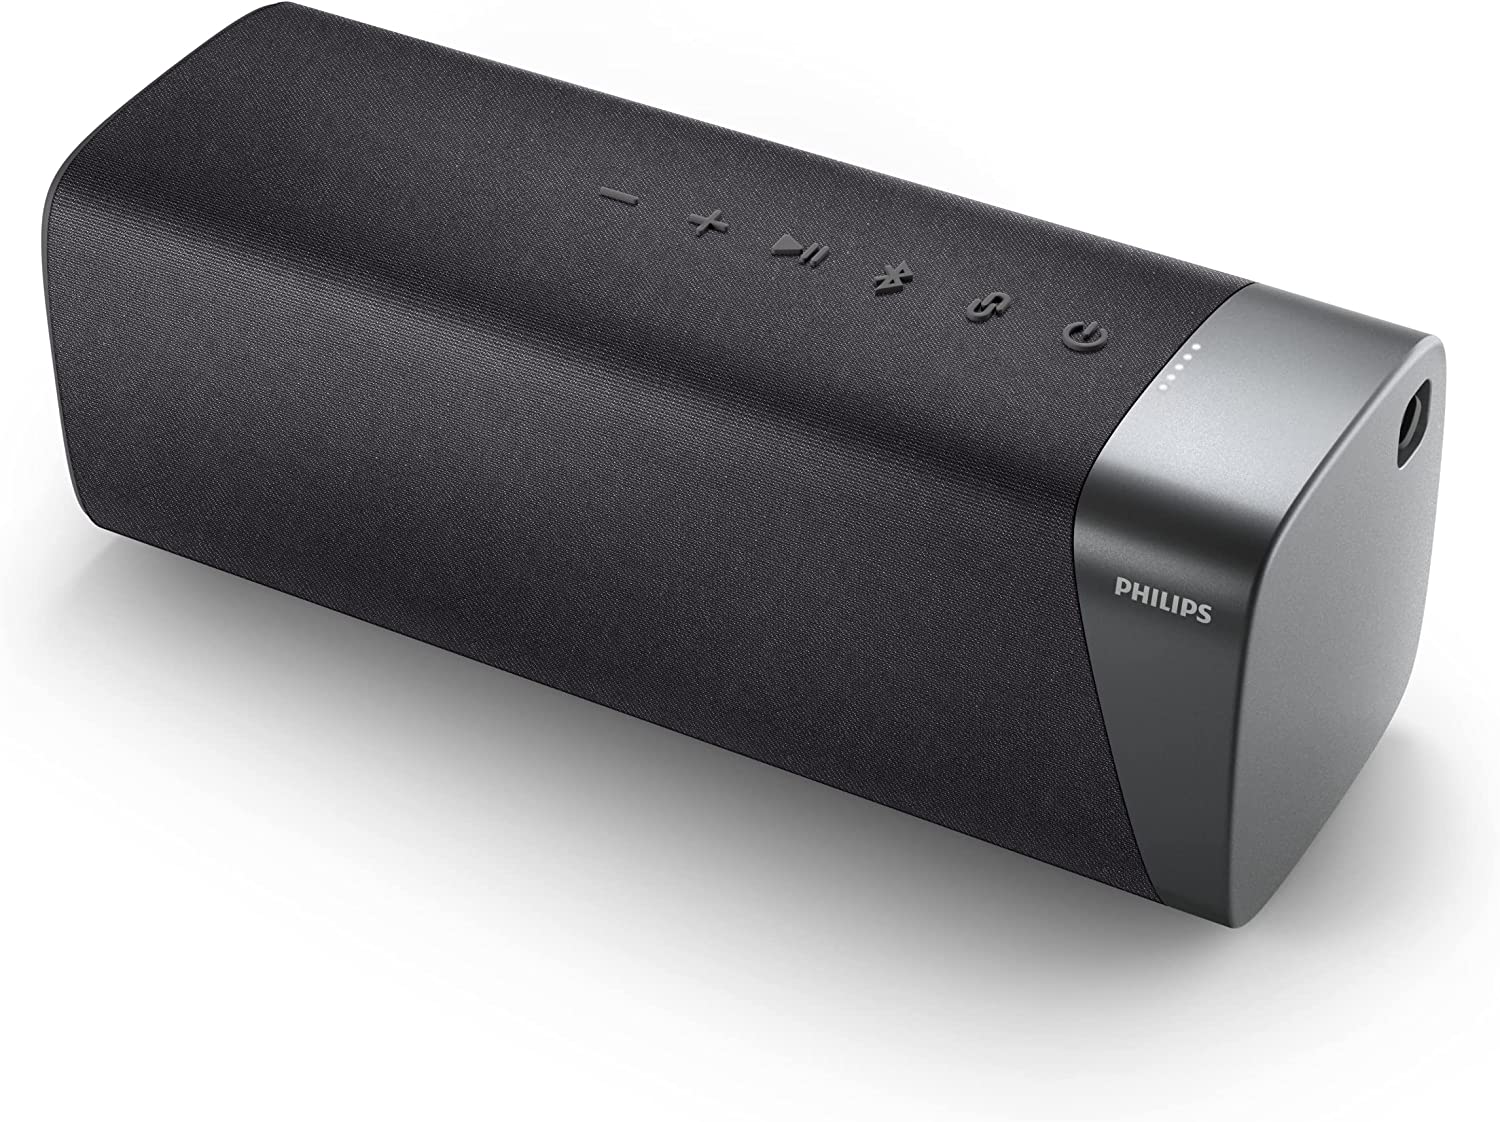 PHILIPS S7505 Wireless Bluetooth Speaker with Built-in Power-Bank, Large Bold Sound, Up to 20 Hours Playtime, IPX7 Waterproof, Shower Ready, Large Size, Gray